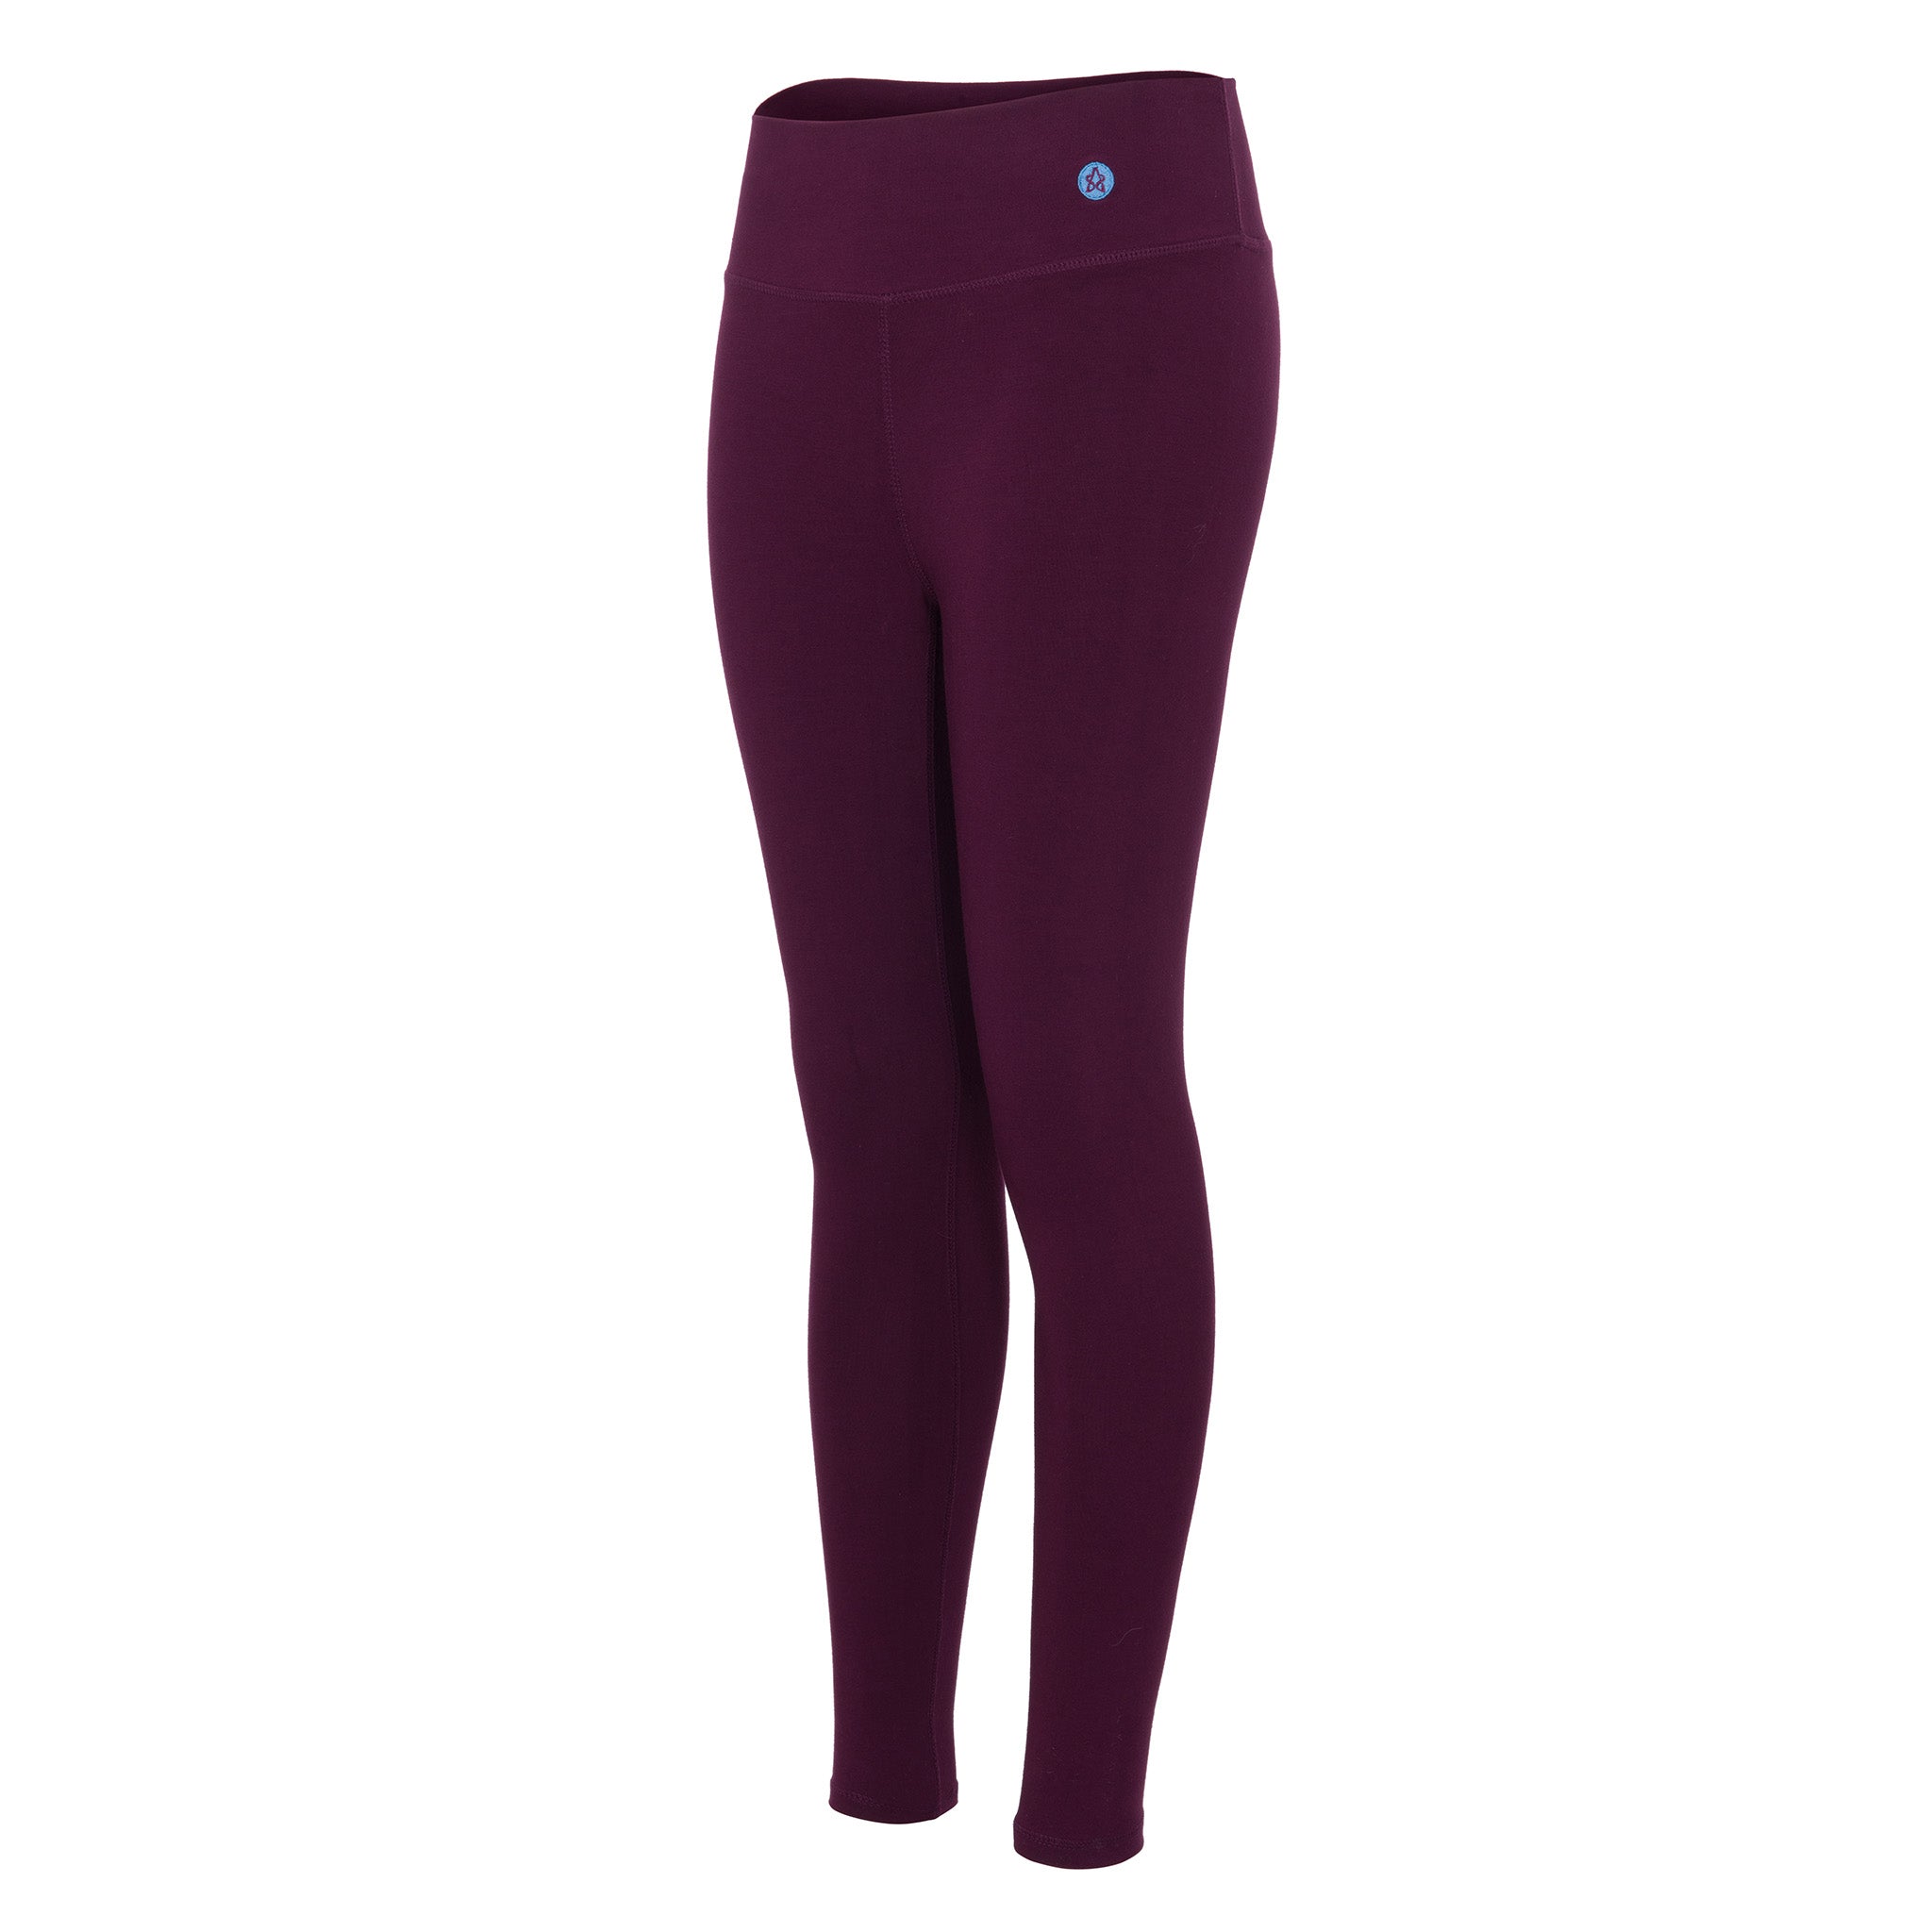 Combo of Solid Color Lycra Leggings in Green and Maroon : BNJ753